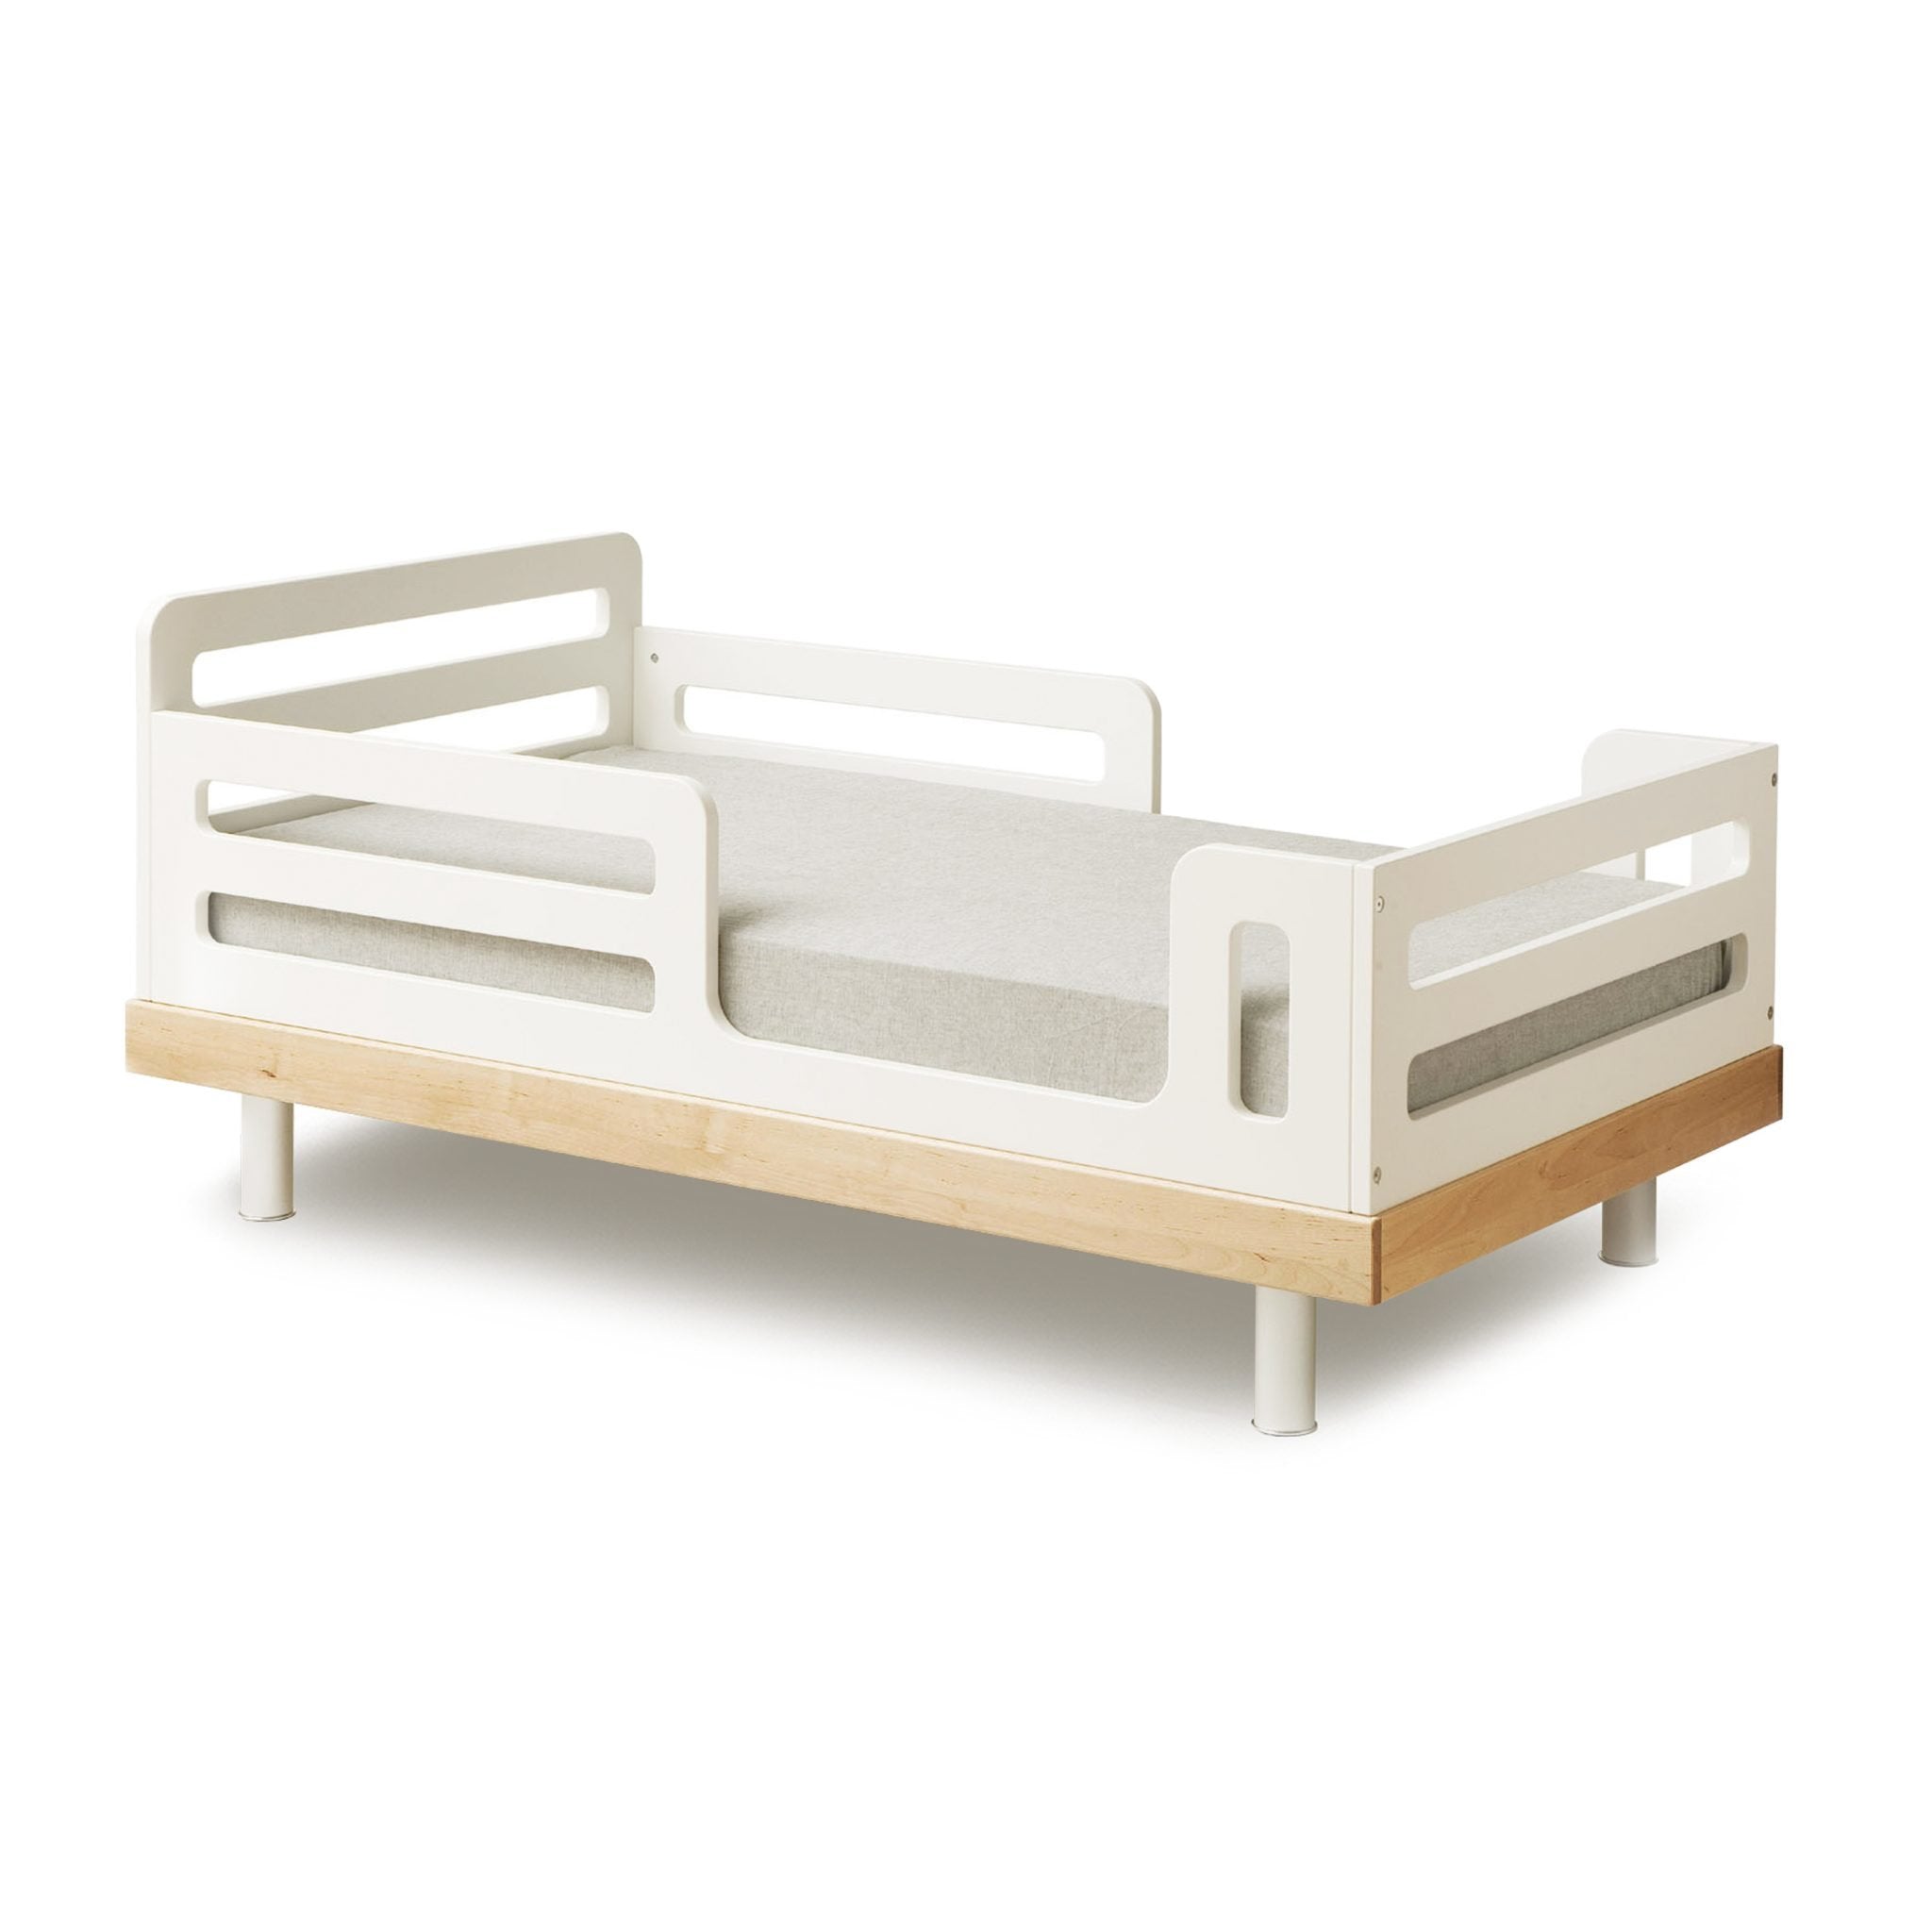 Classic-Toddler-Bed-Birch